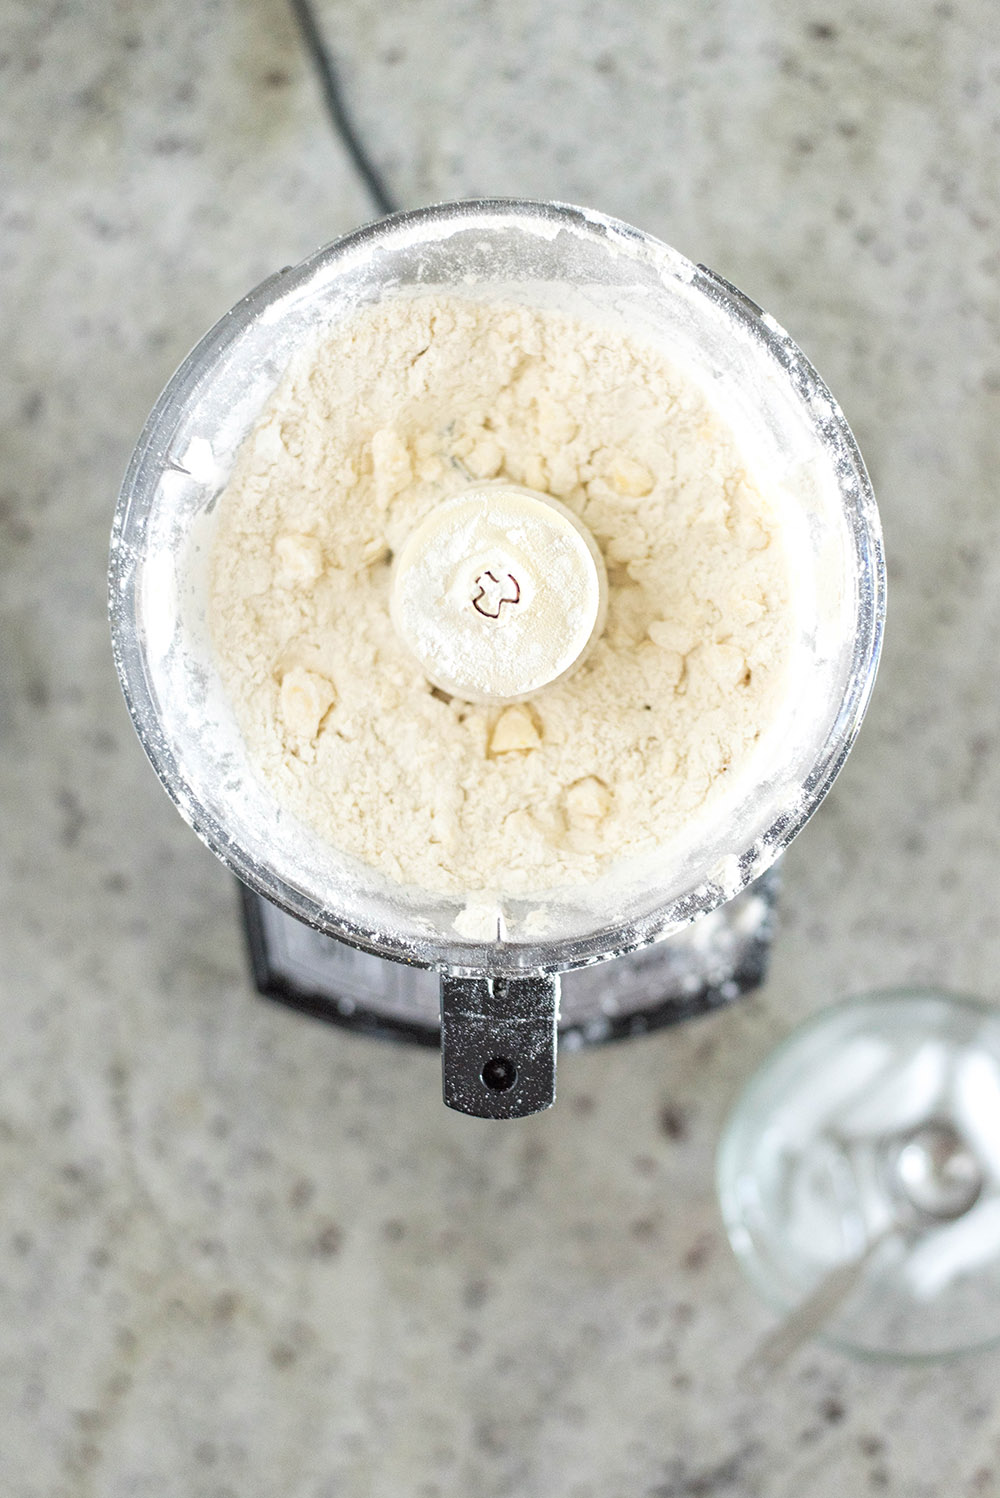 A food processor filled with ingredients.